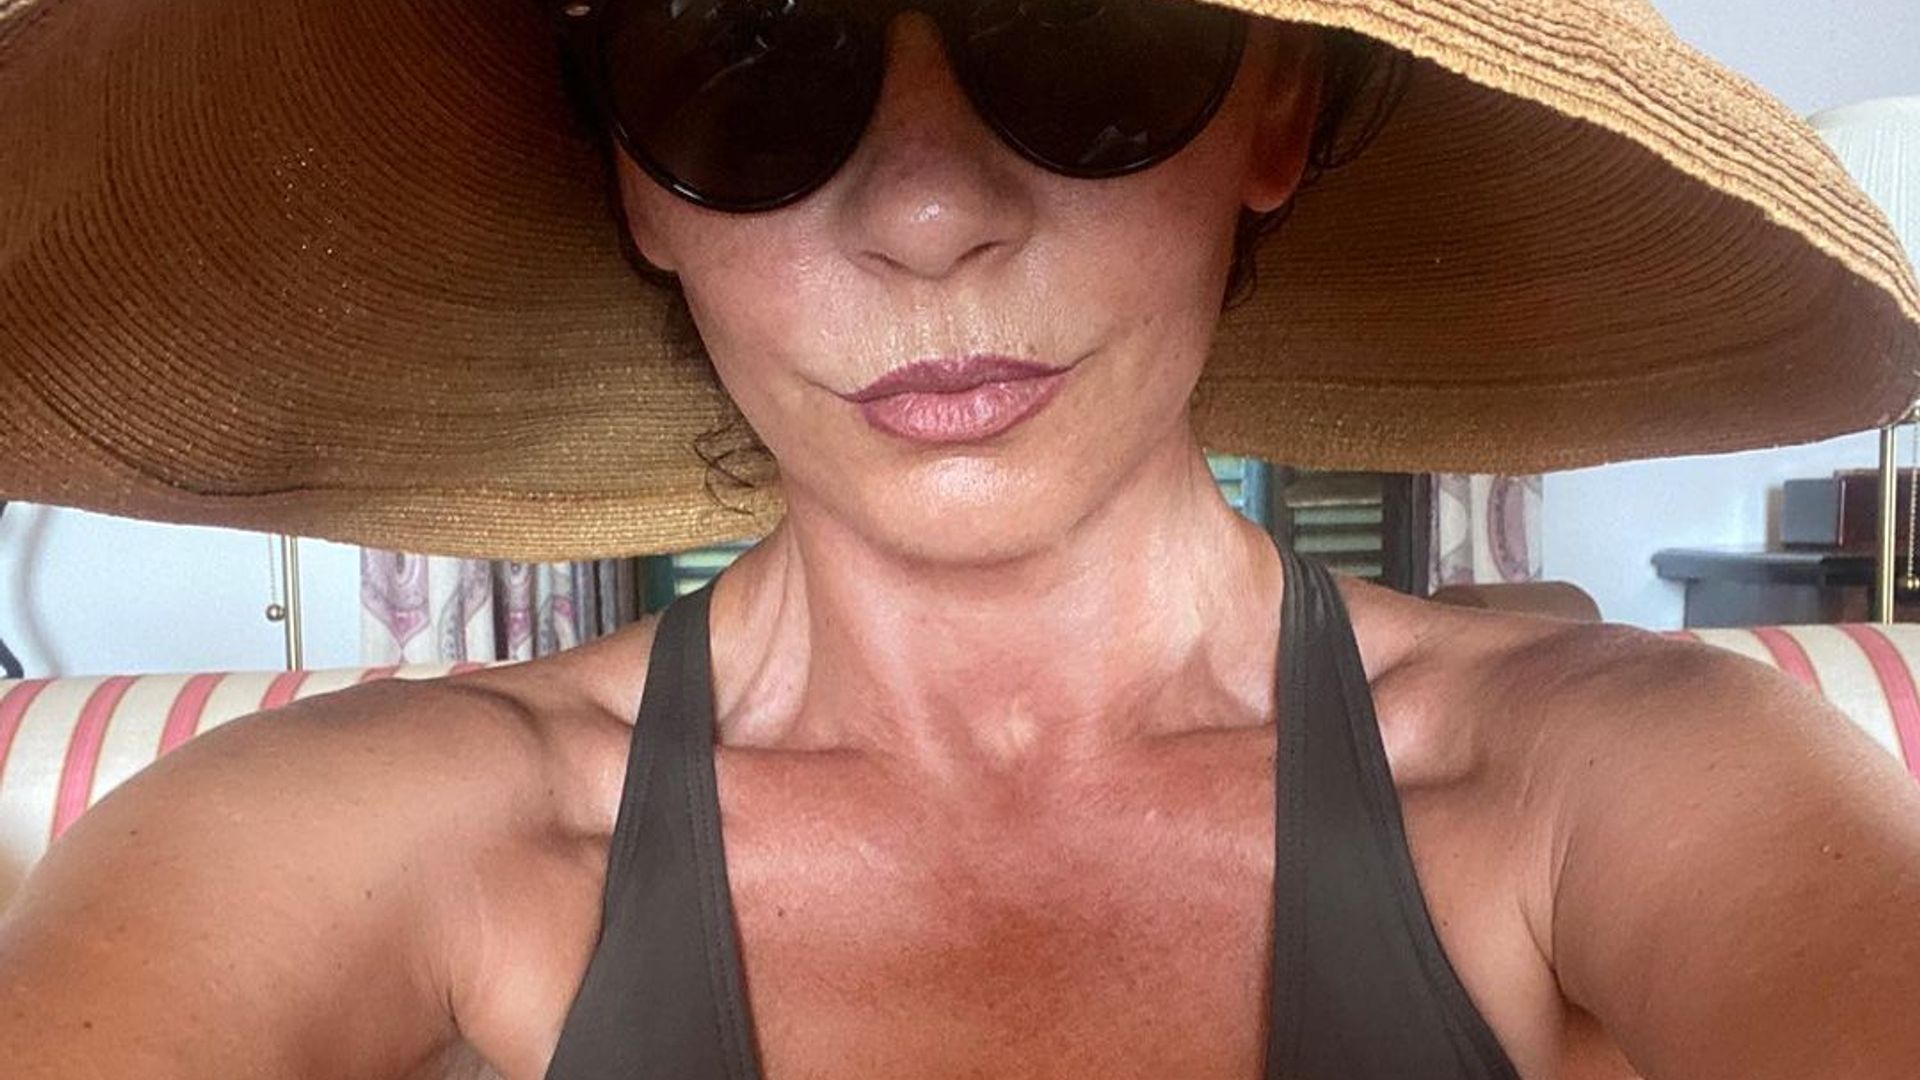 Catherine Zeta-Jones shares photos of herself in a plunging swimsuit on Instagram